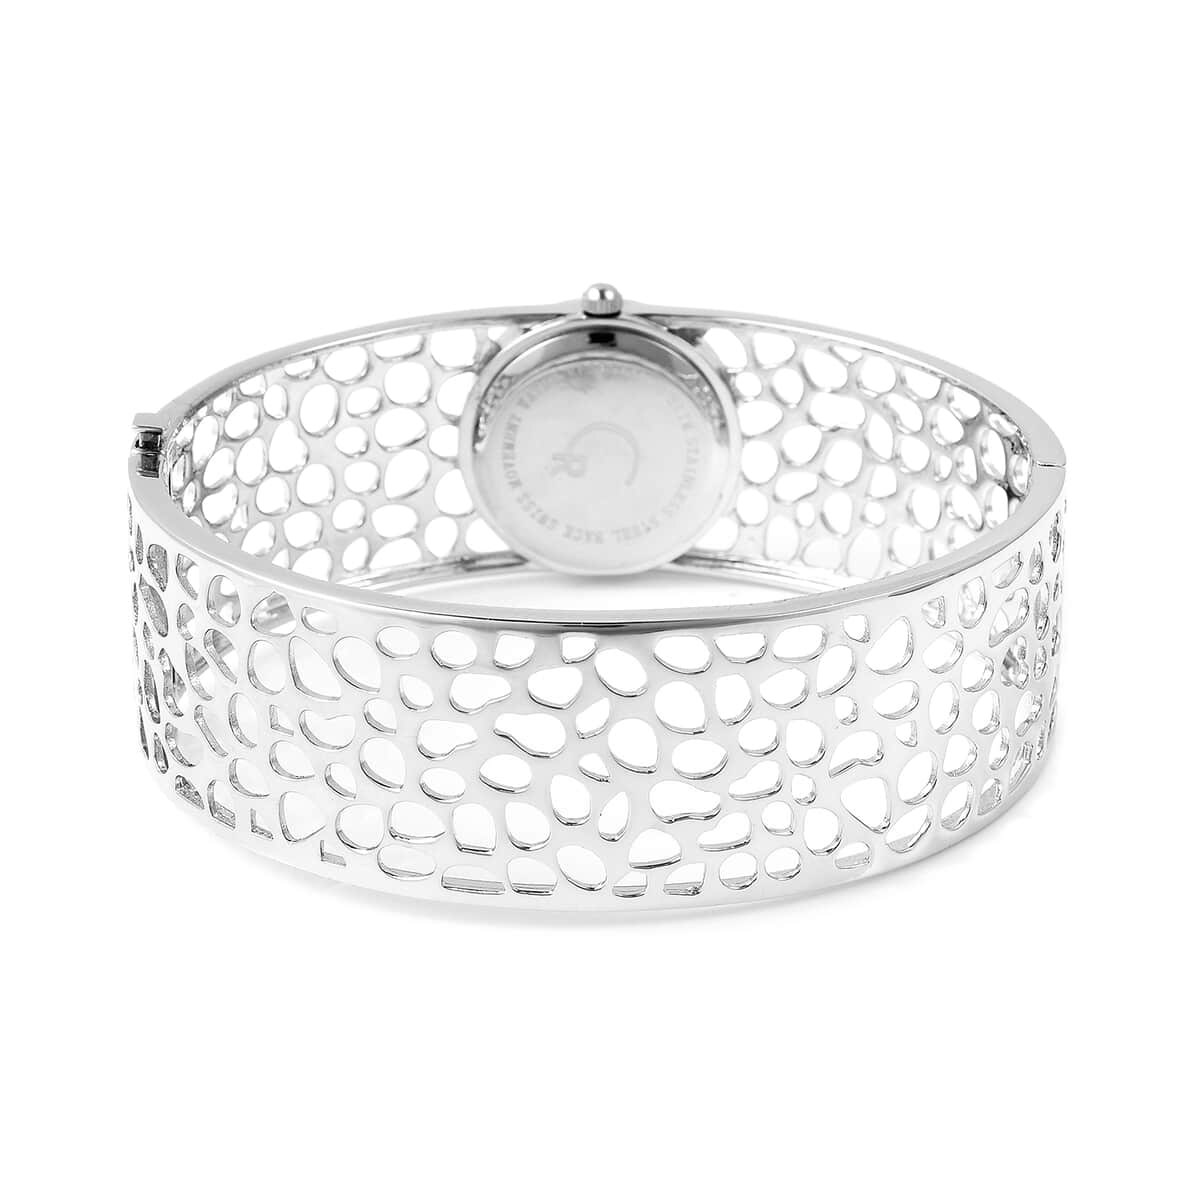 RACHEL GALLEY Swiss Movement Watch Bangle Bracelet in Sterling Silver with Stainless Steel Back (7.5 in) 52.10 Grams image number 6